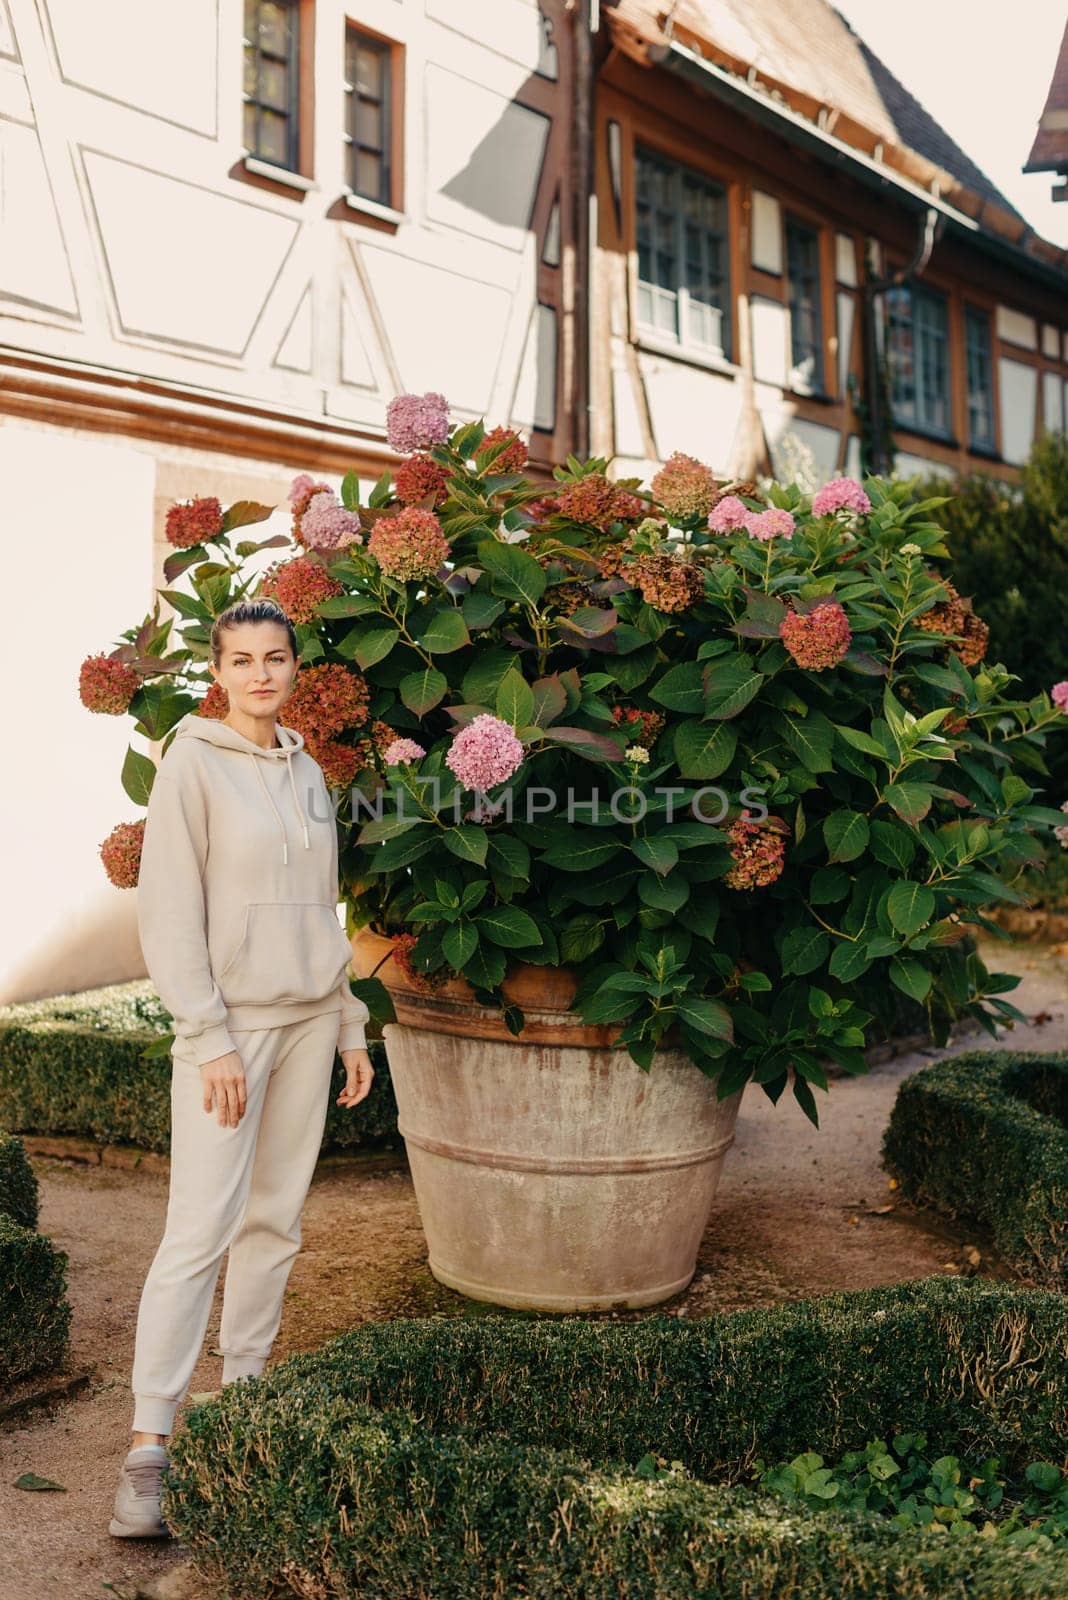 Attractive curly blonde woman walk on the city park street. Girl wear purple hoodie look happy and smiles. Woman make here me gesture standing near pink blooming bush flowers. Happy laughing girl